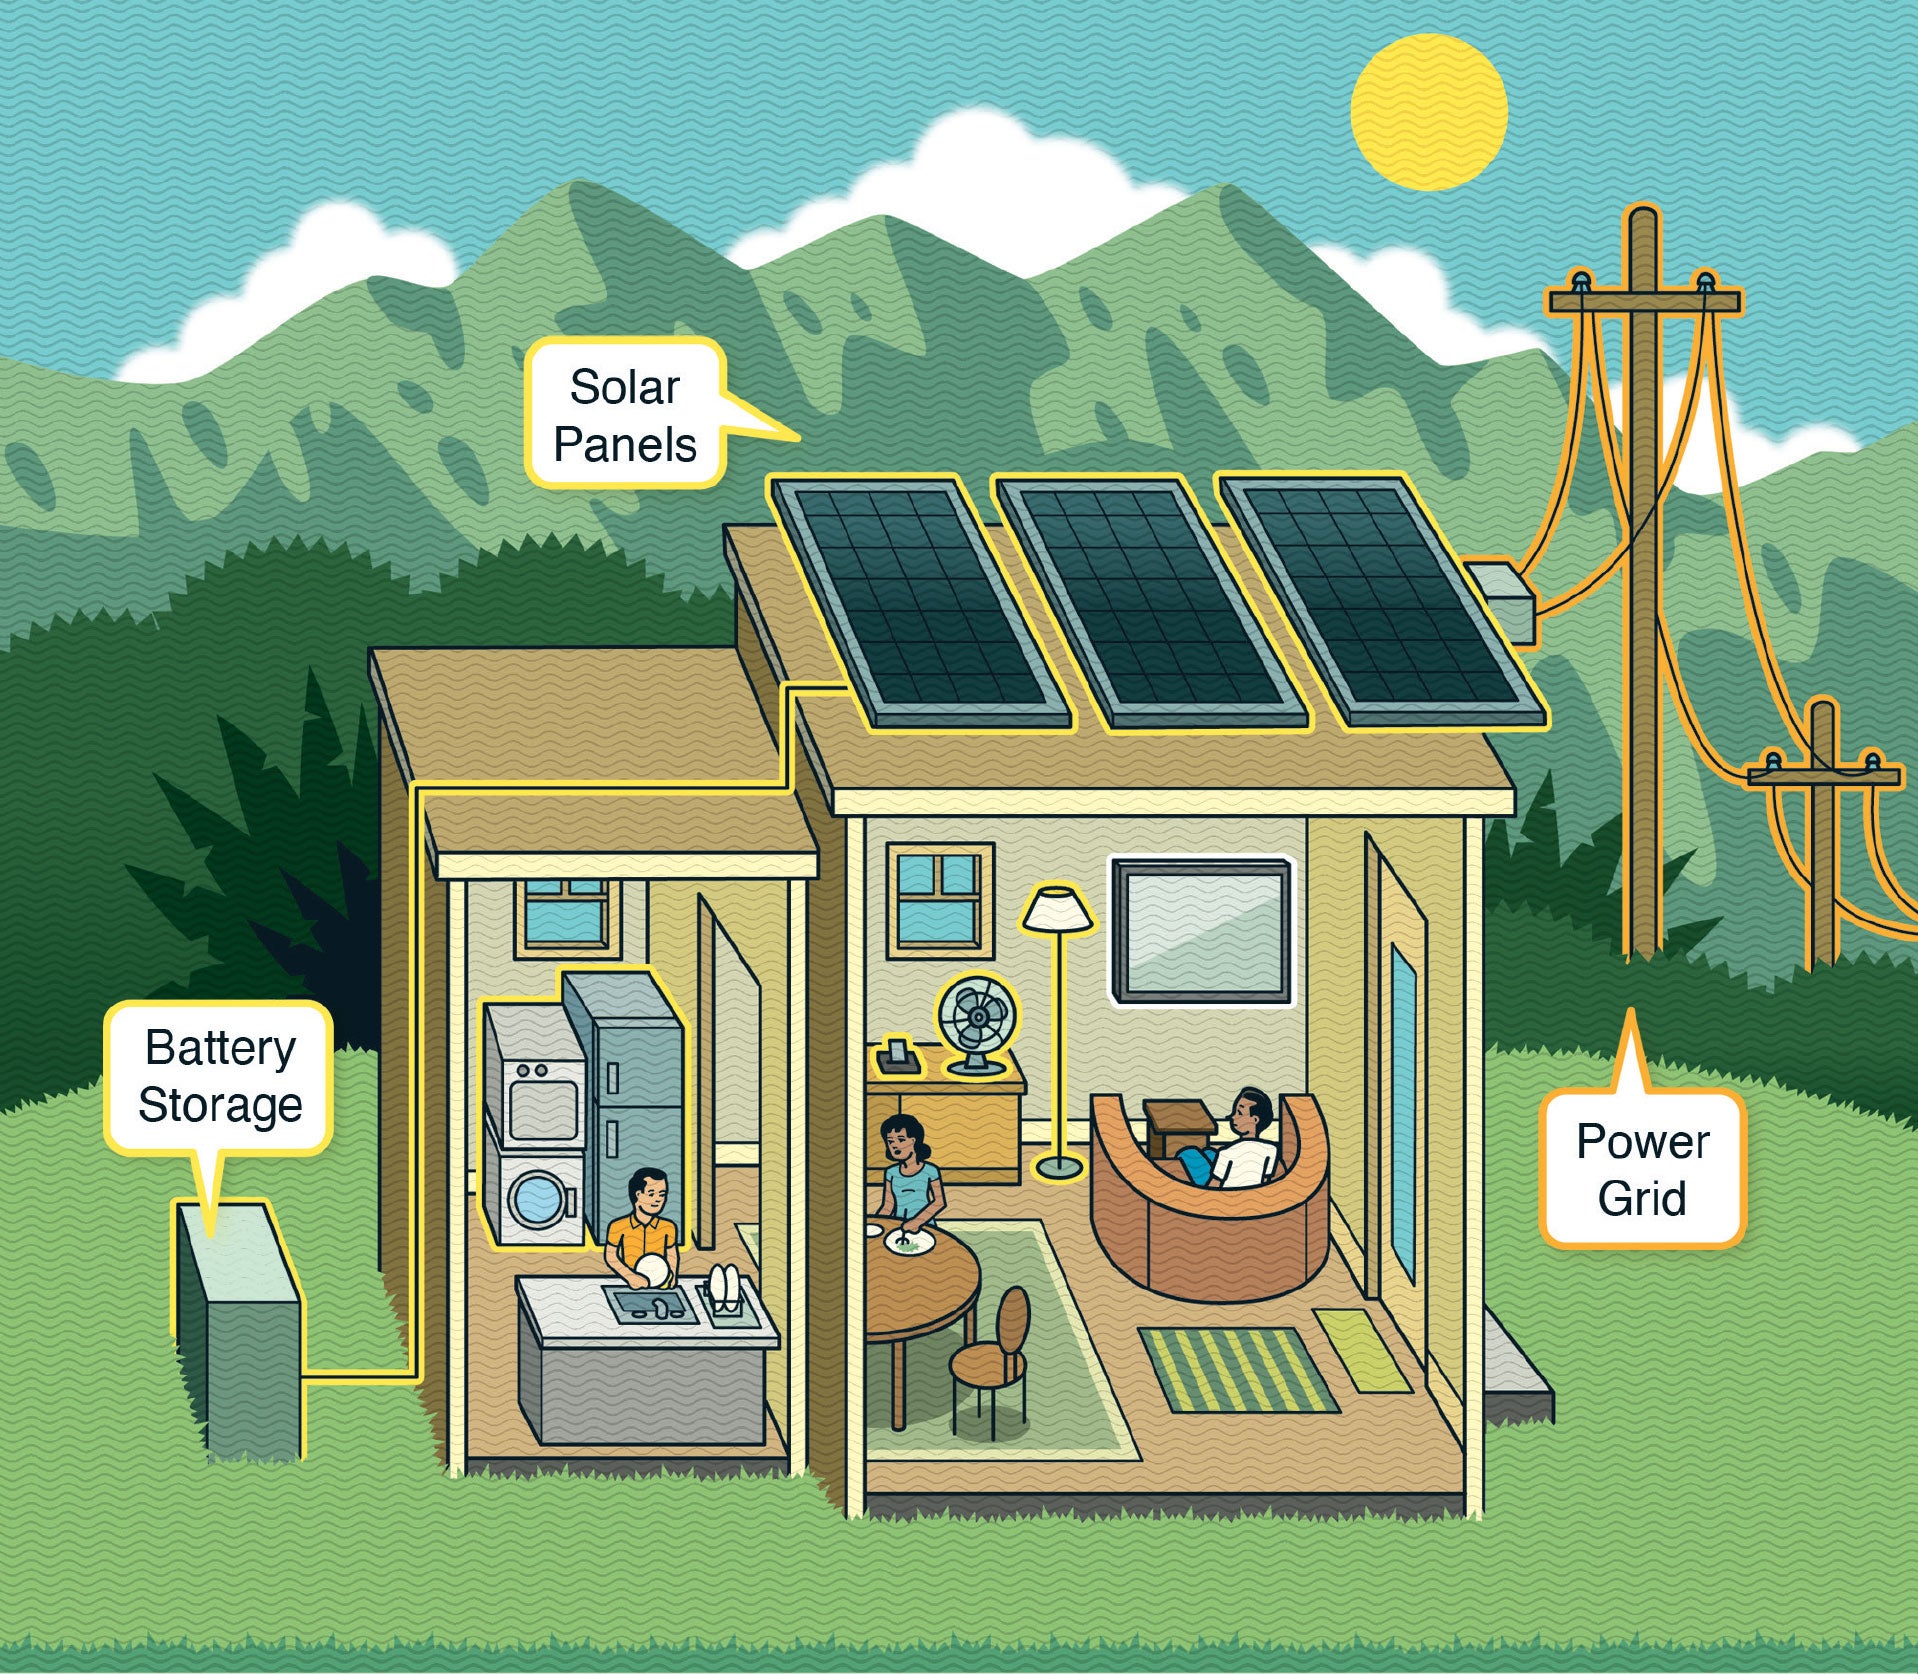 Infographic of a rooftop solar system.